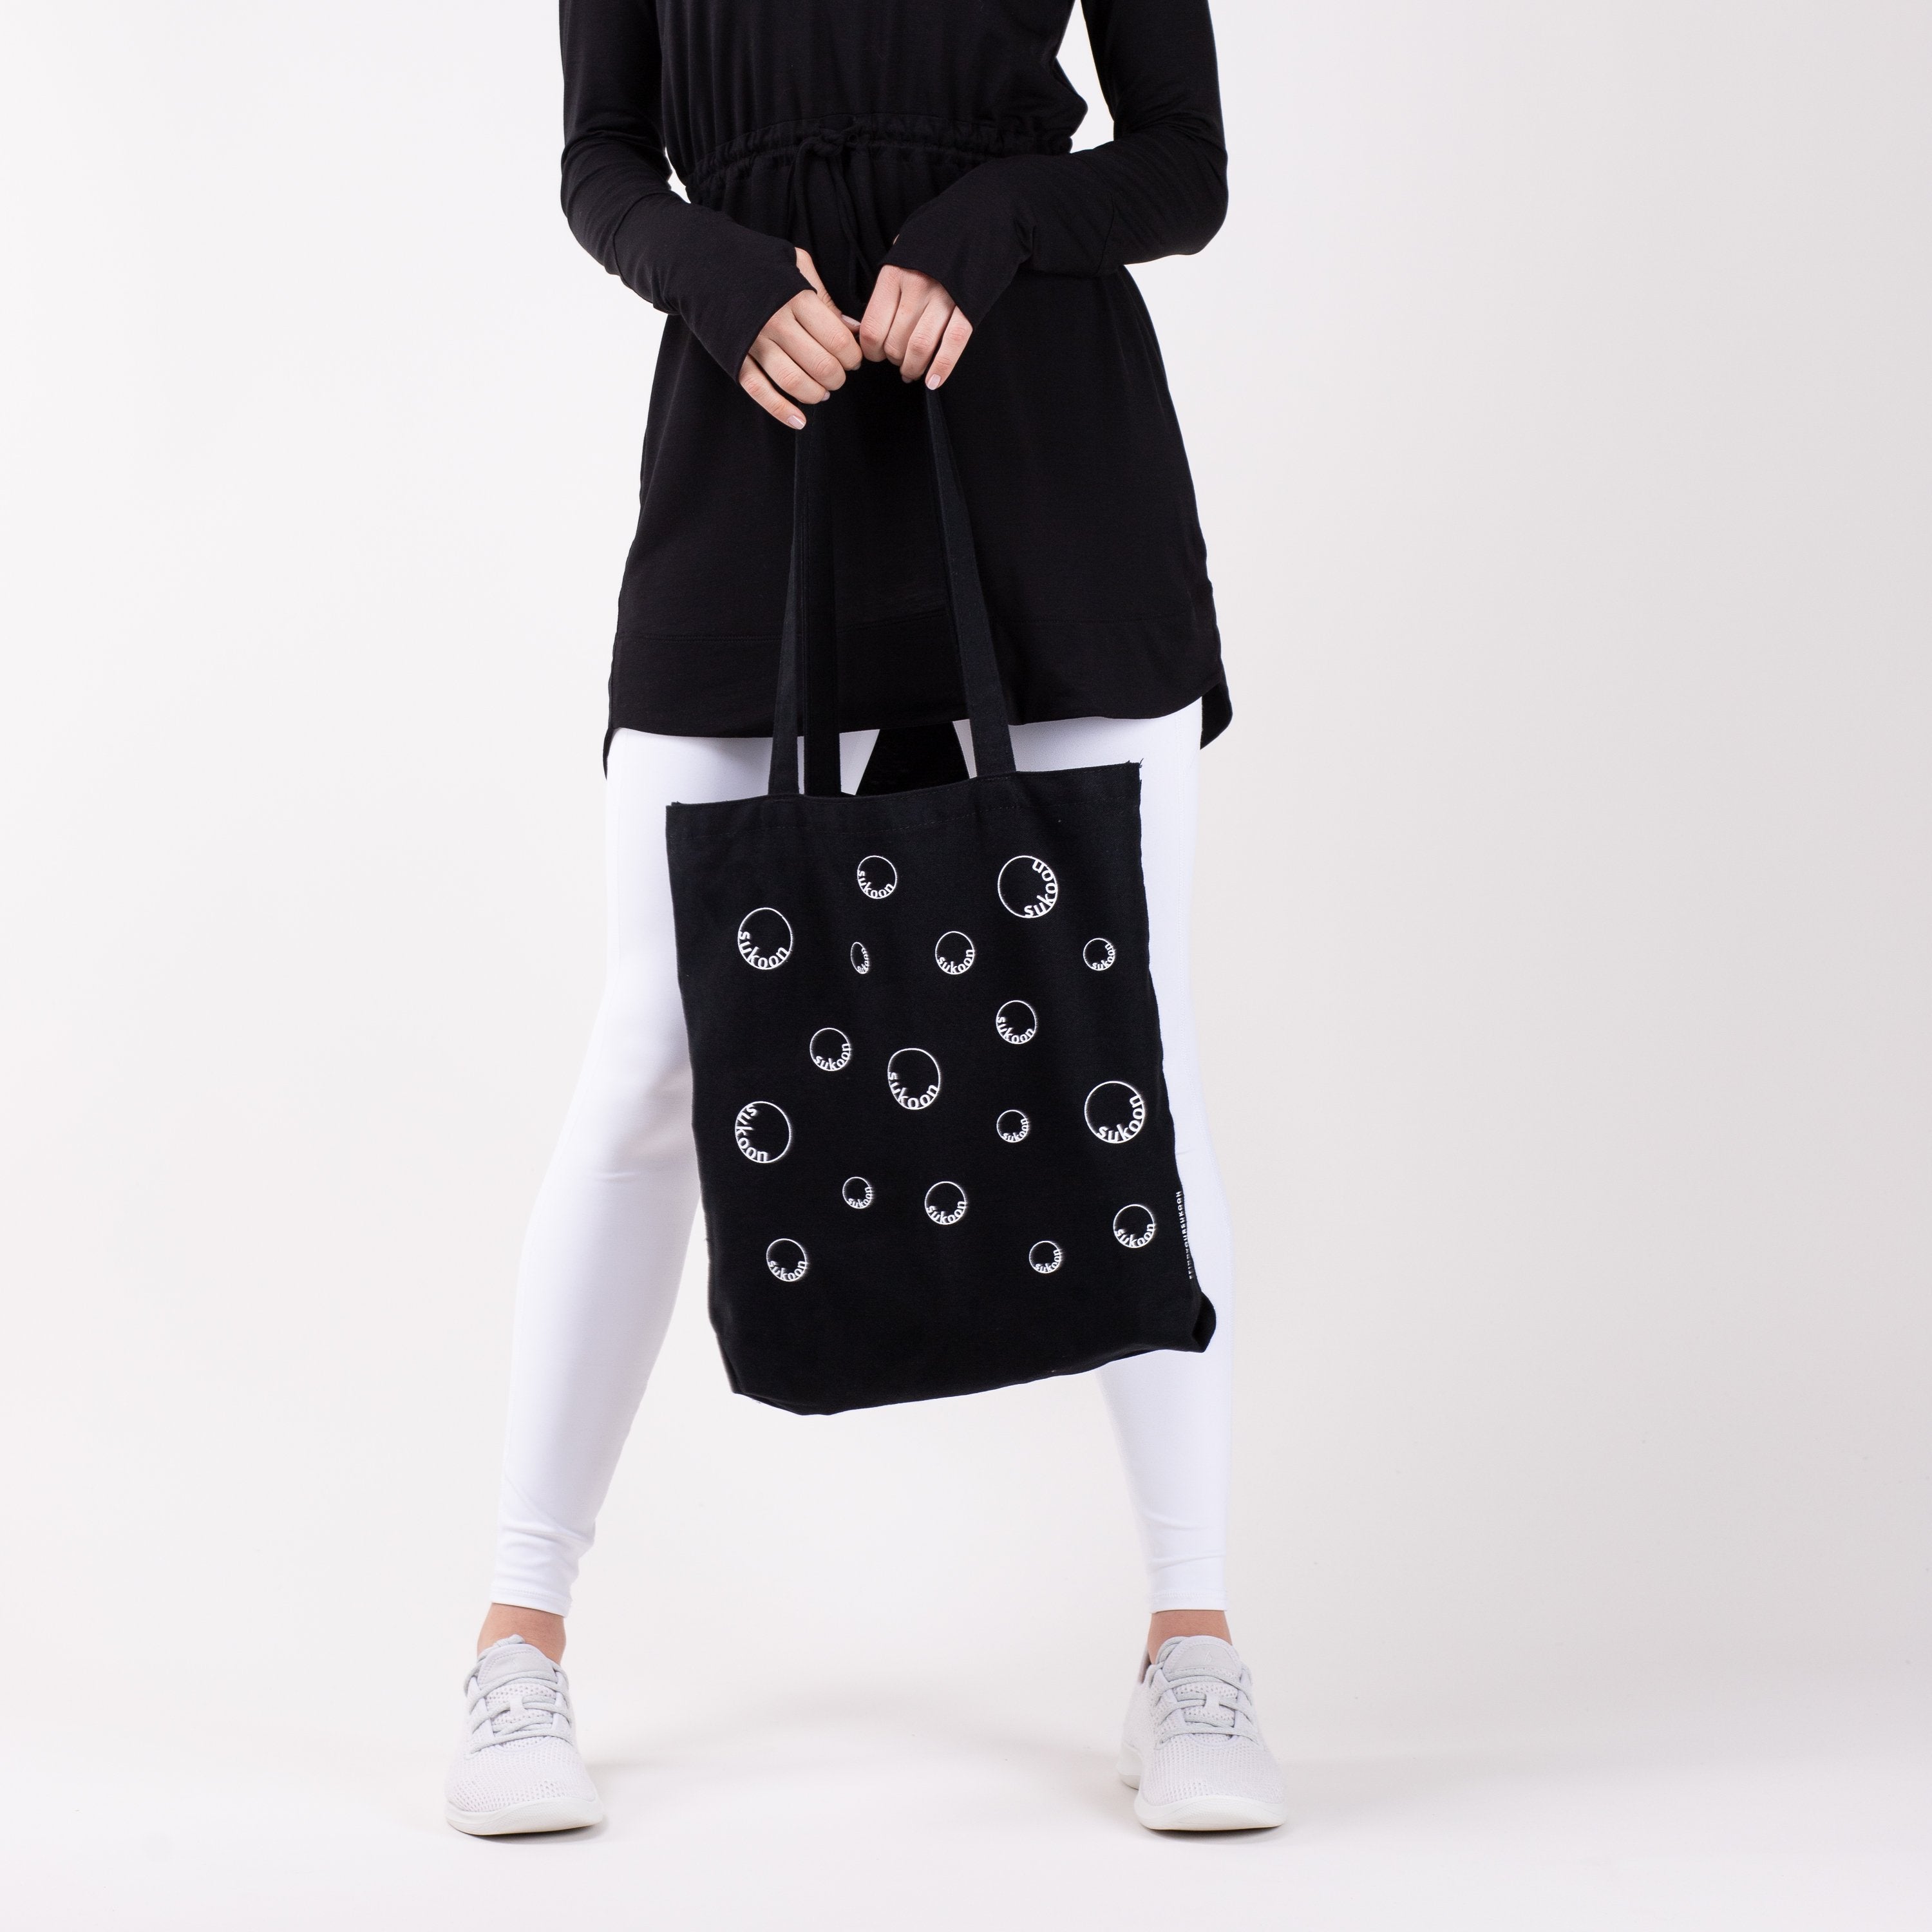 Woman holding black tote bag with moon print in front of her.